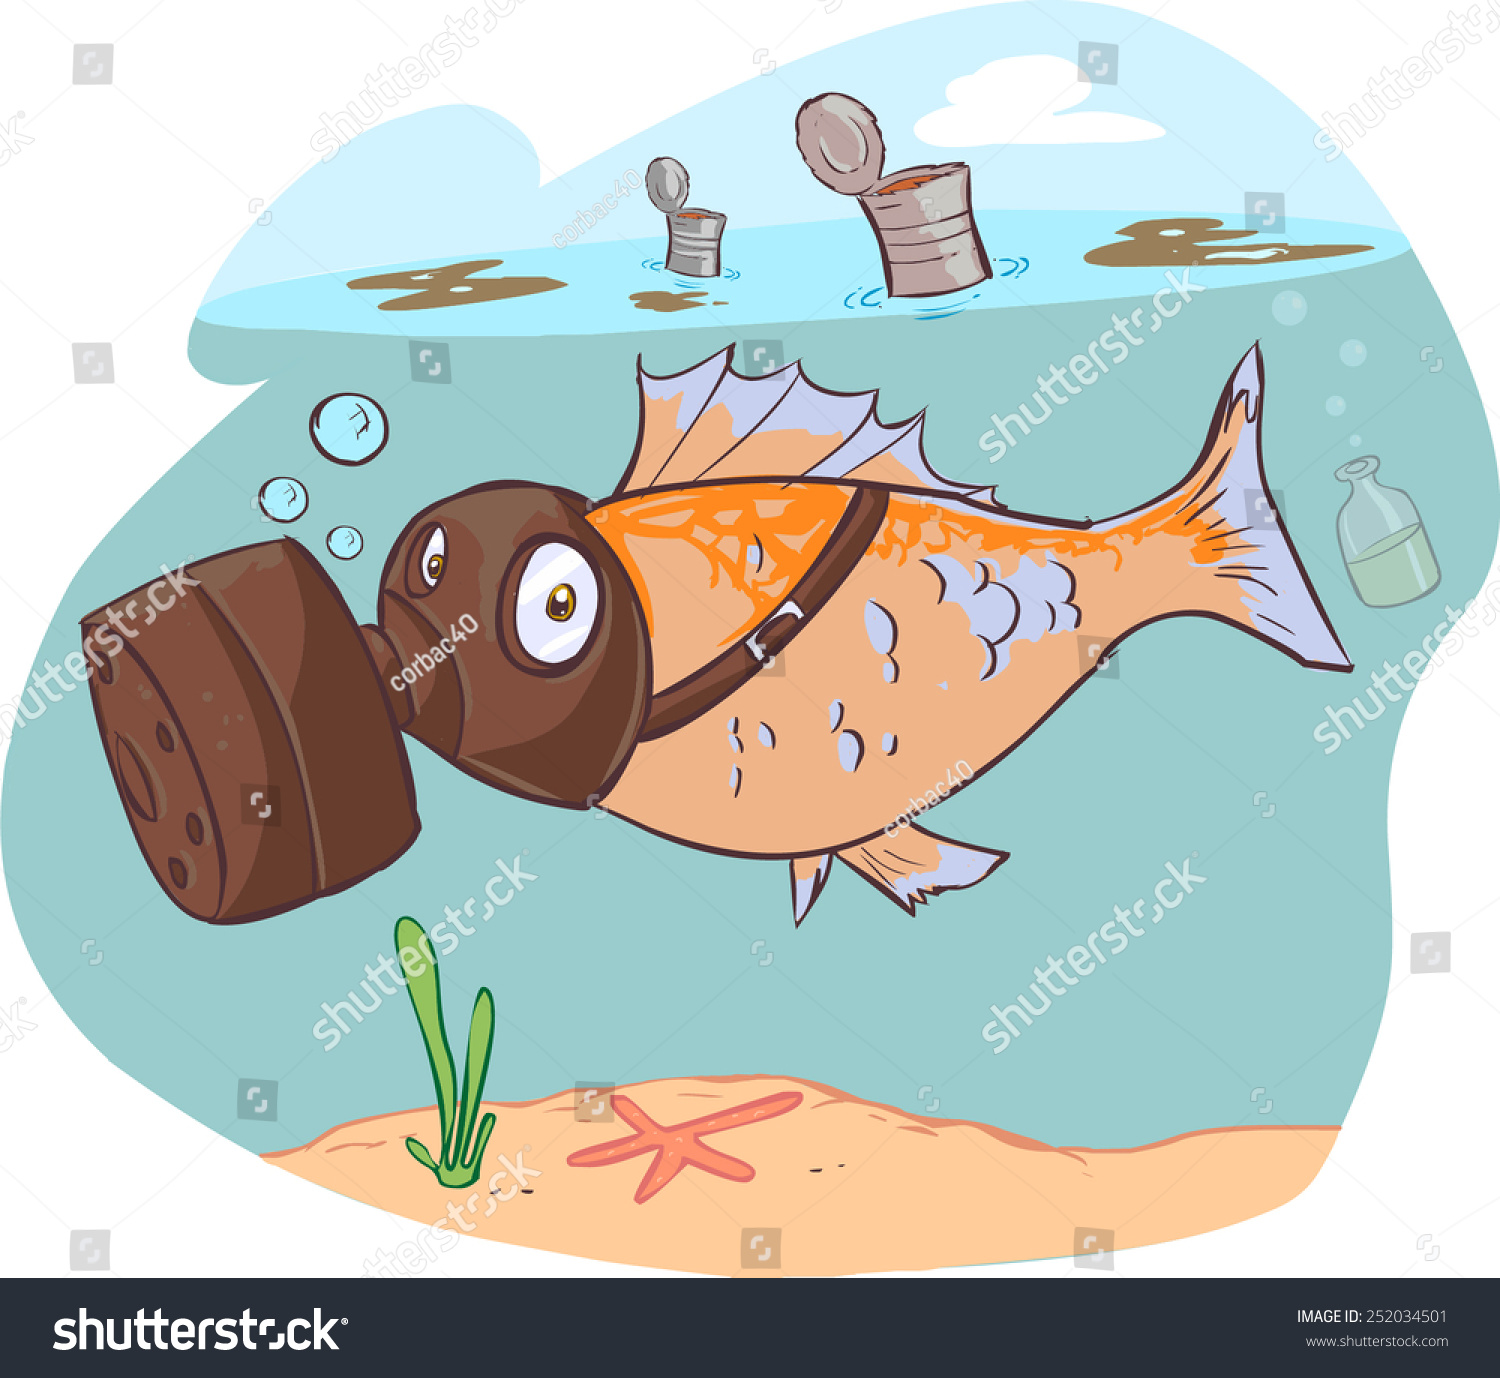 Dirty Sea And Fish Stock Vector 252034501 : Shutterstock